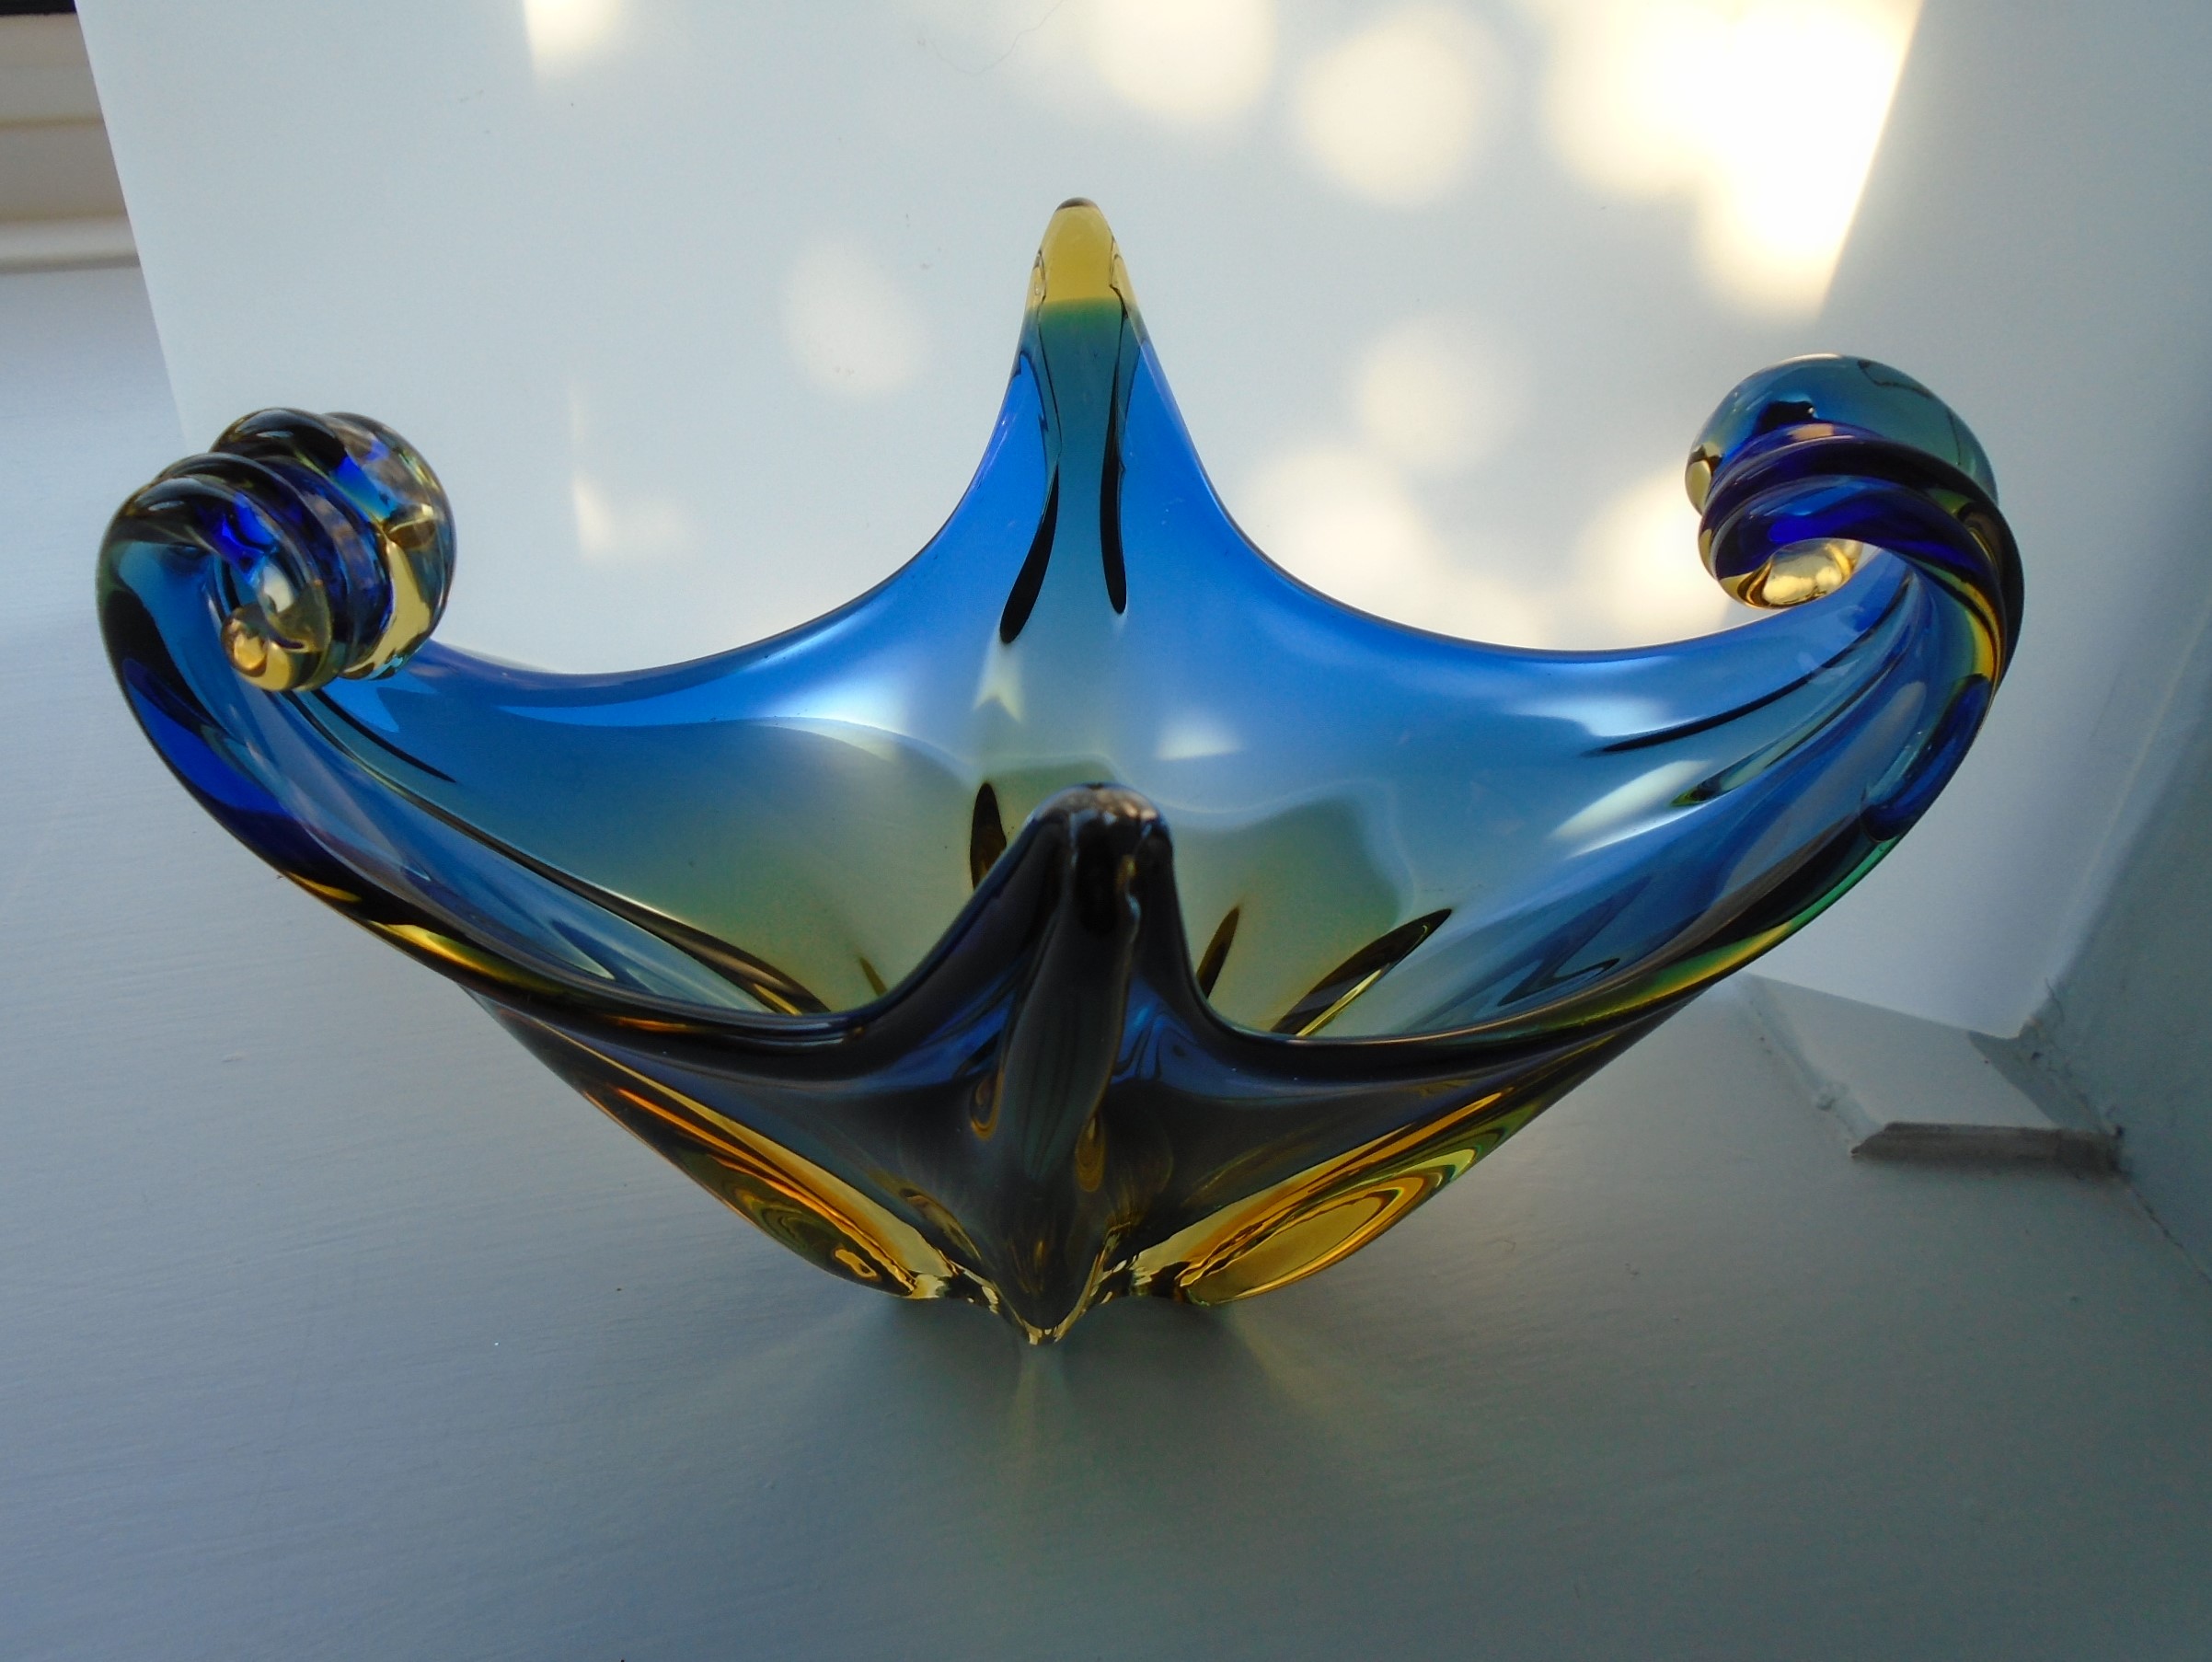 Stunning example of Czech Mid Century Modern Glass in the form of this Josef Hospodka Organic  Deep Blue and Amber Bowl produced by Maker Chribska in the 1960s.